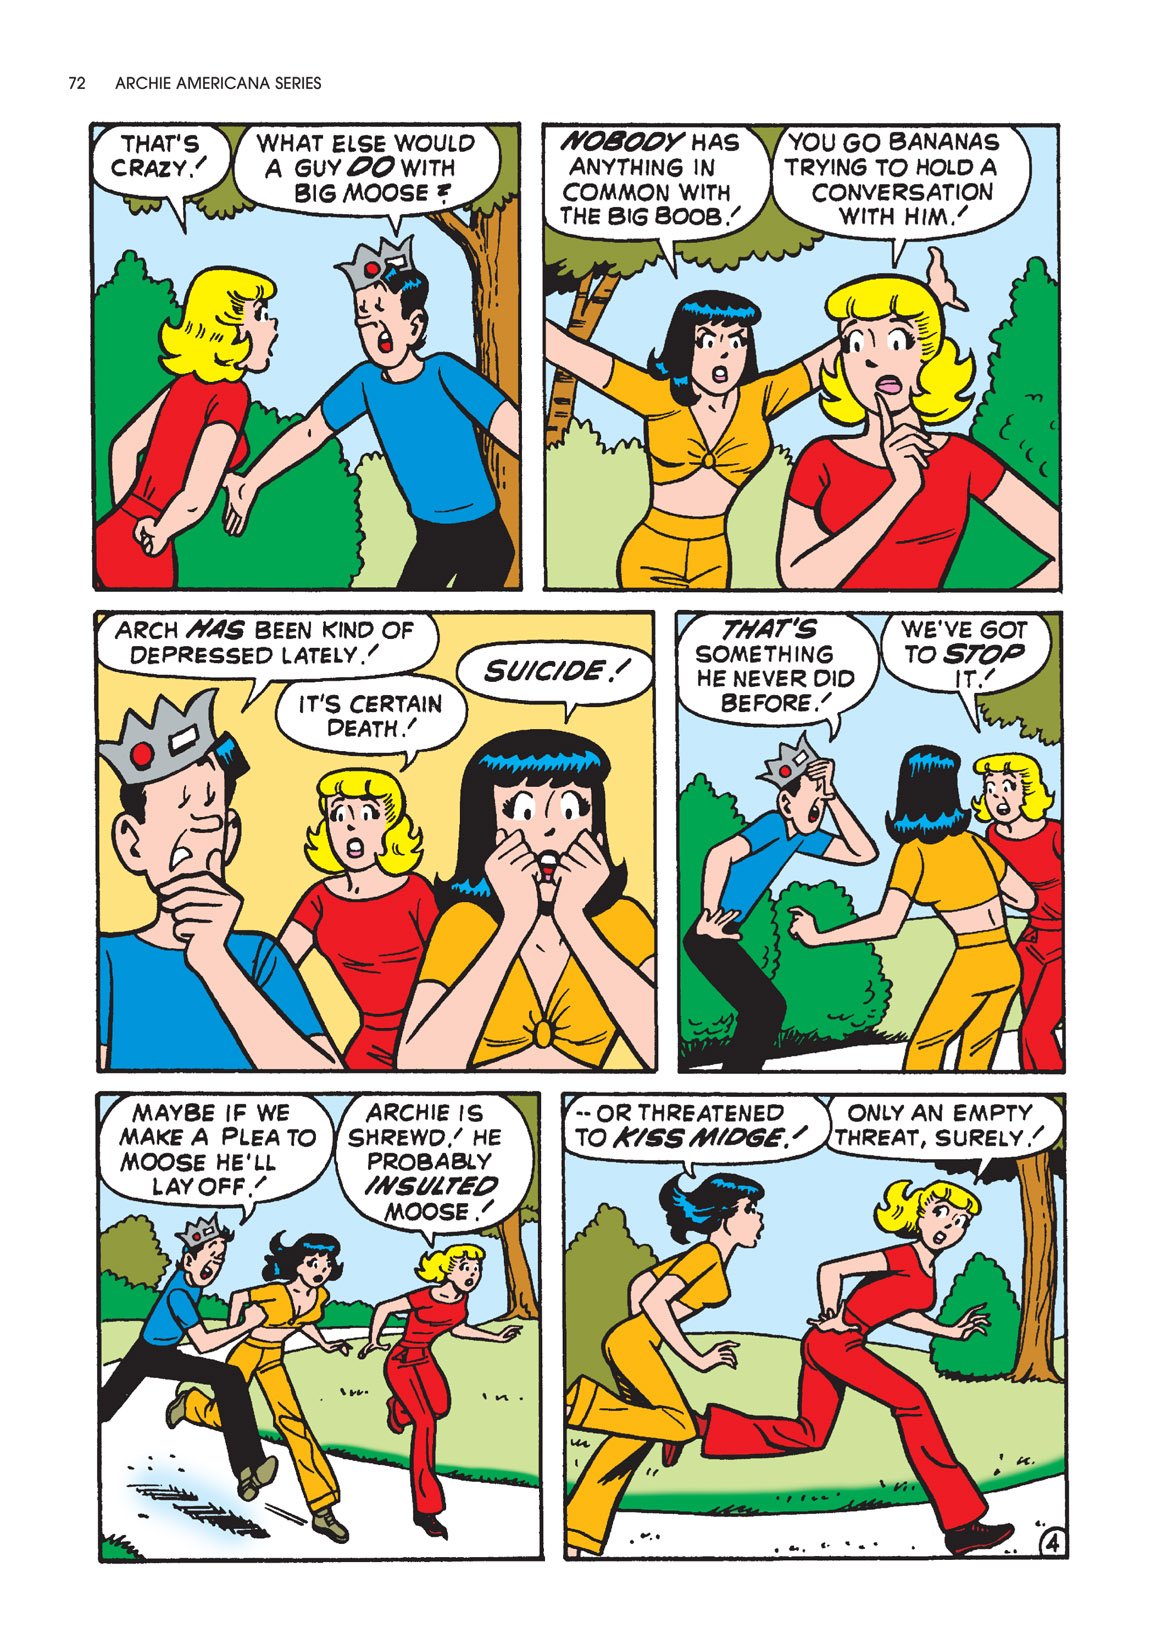 Read online Archie Americana Series comic -  Issue # TPB 10 - 73